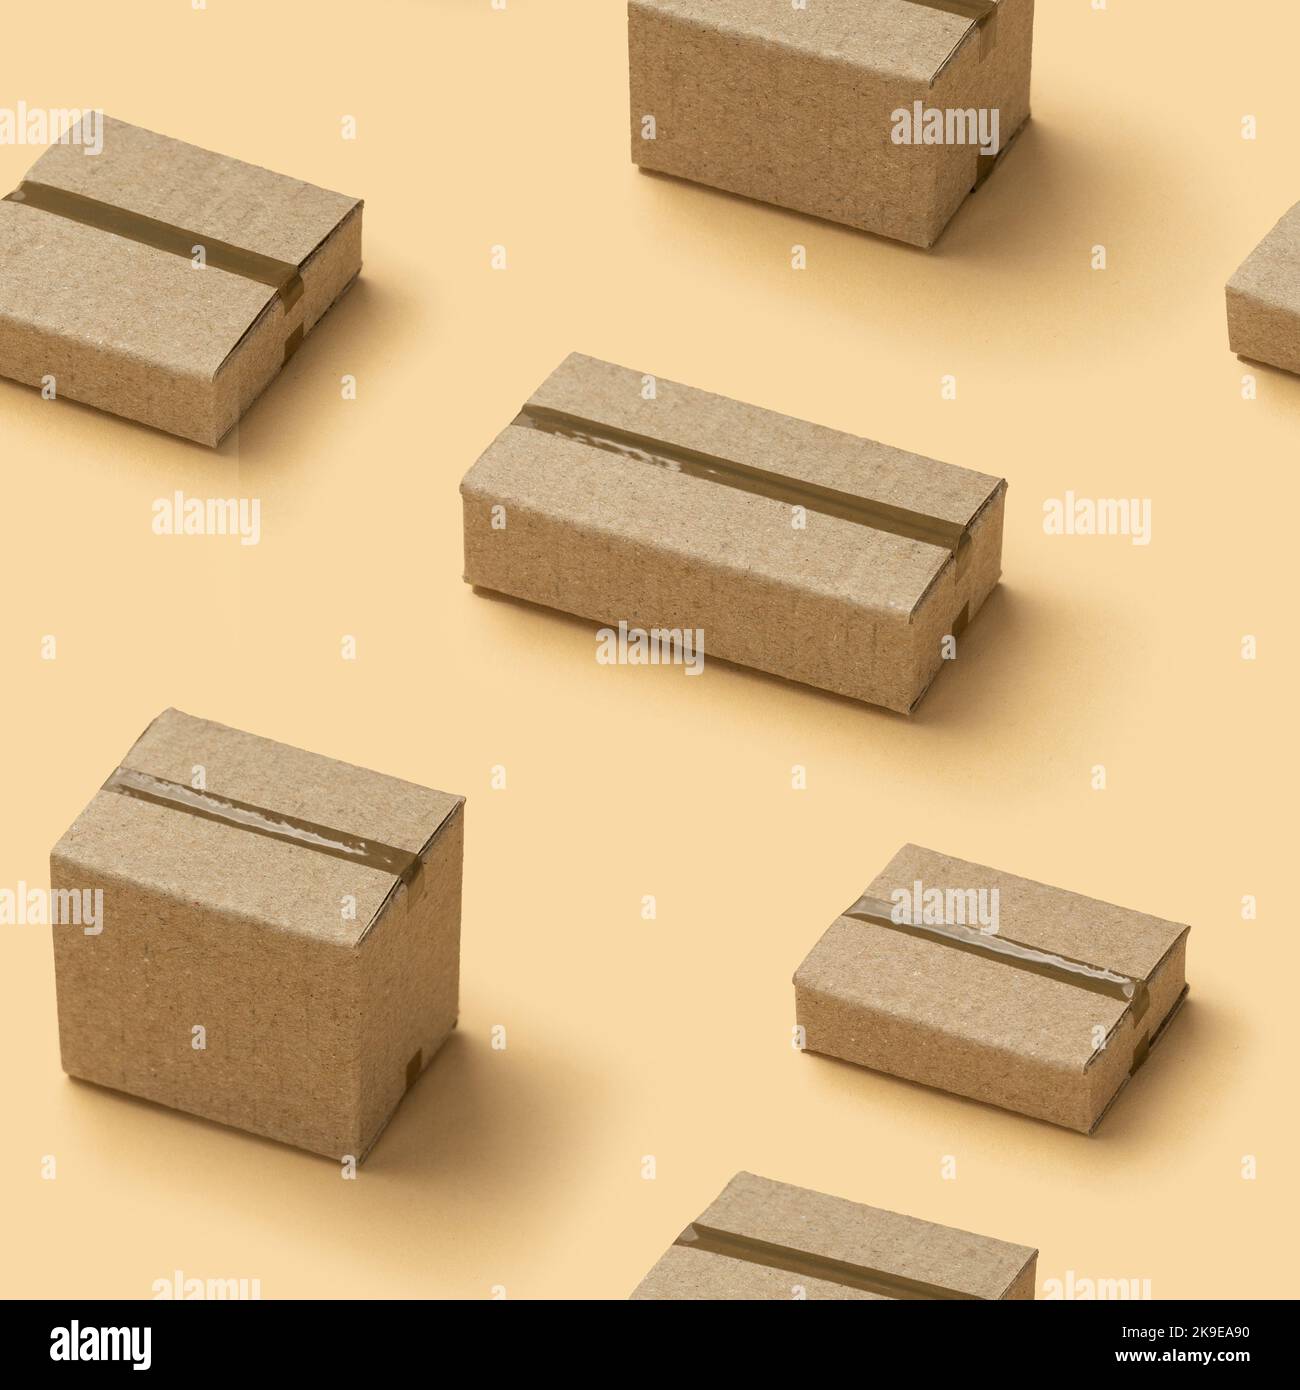 Cardboard boxes seamless pattern texture on brown background. Stock Photo